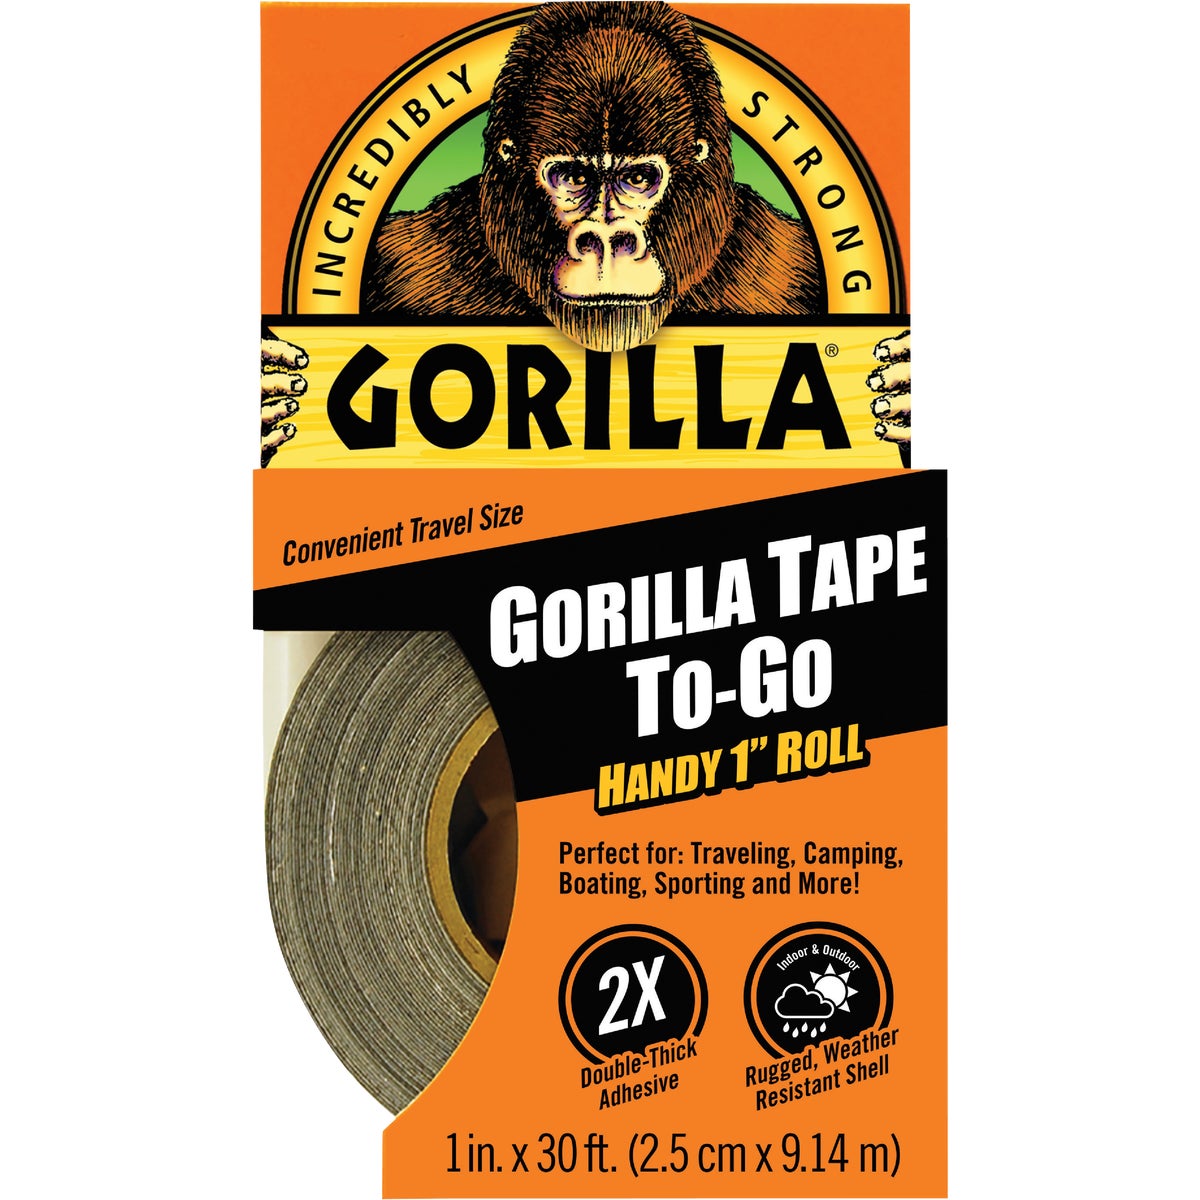 Item 403324, Gorilla Tape is 3X stronger for a hold that lasts.